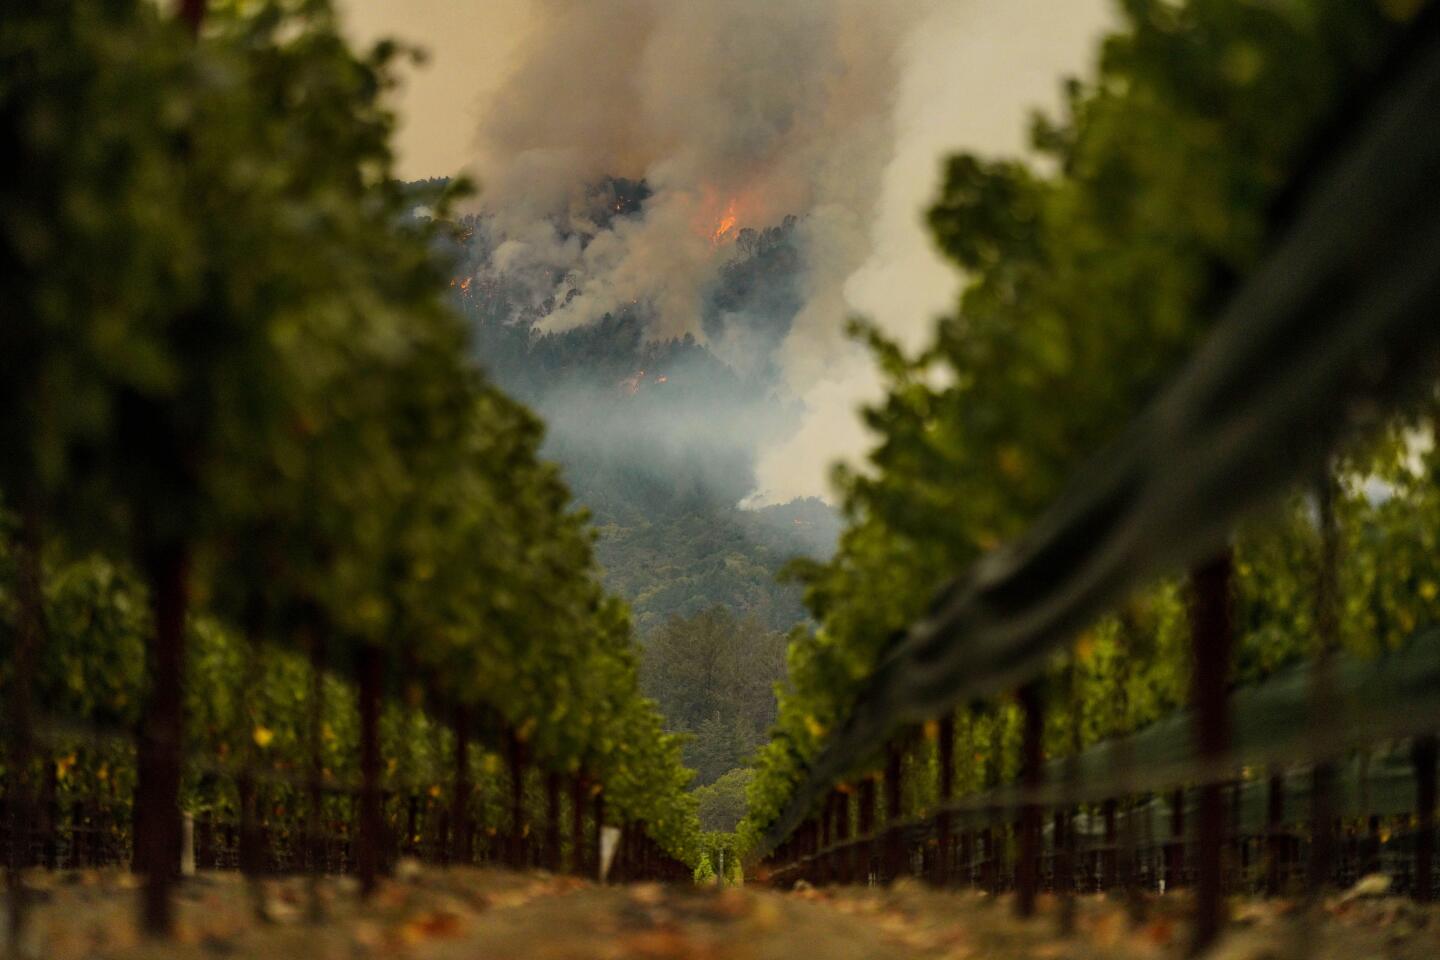 A row of grapes in St. Helena, Calif., with smoke billowing and fire burning in the background Sept. 28.